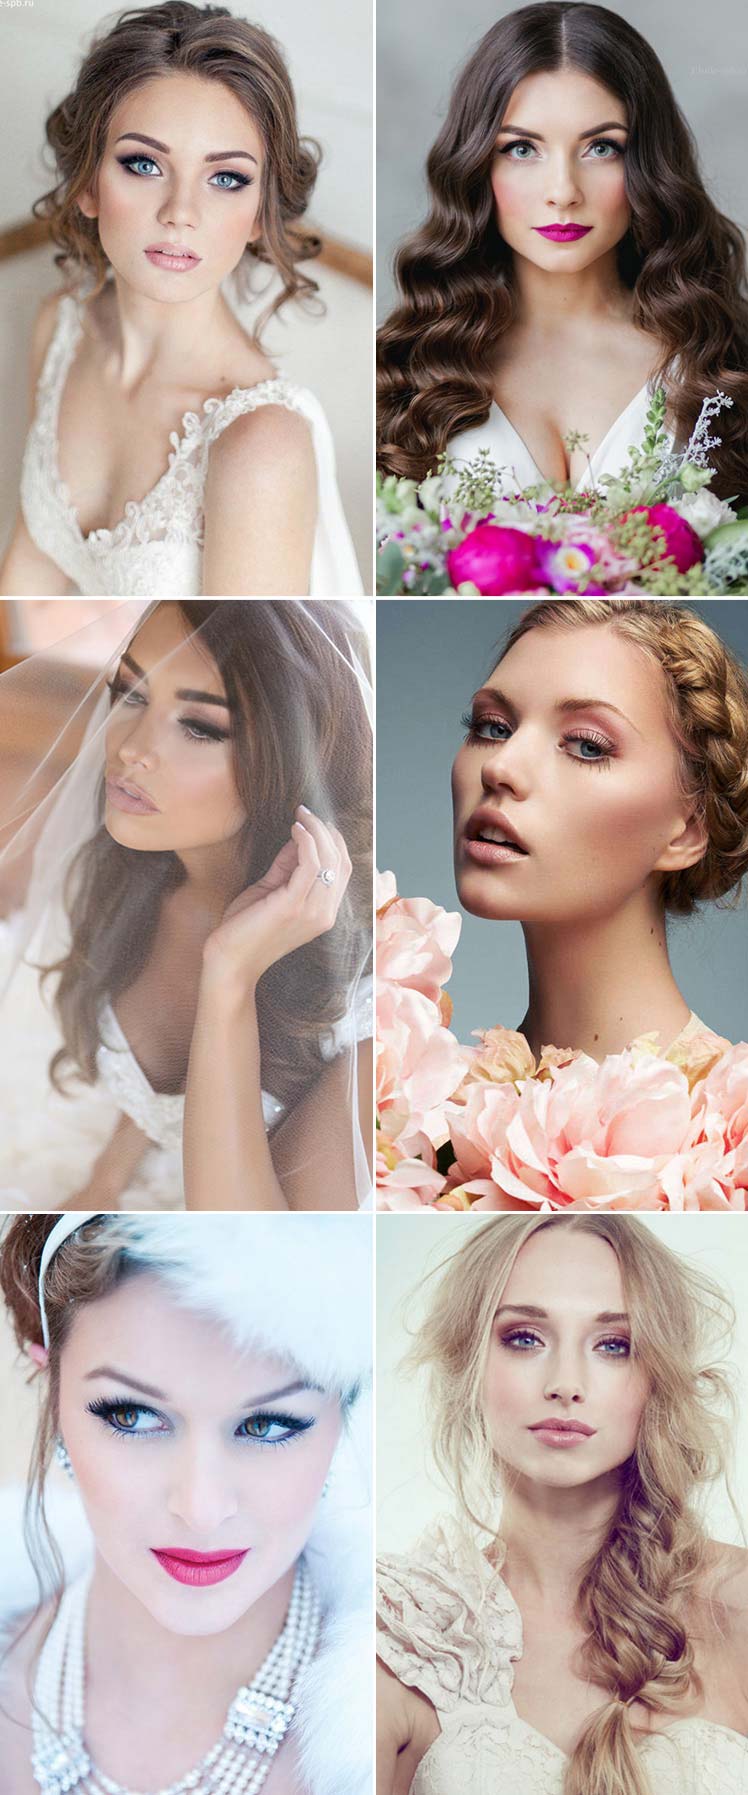 Classic bridal make-up ideas for every style